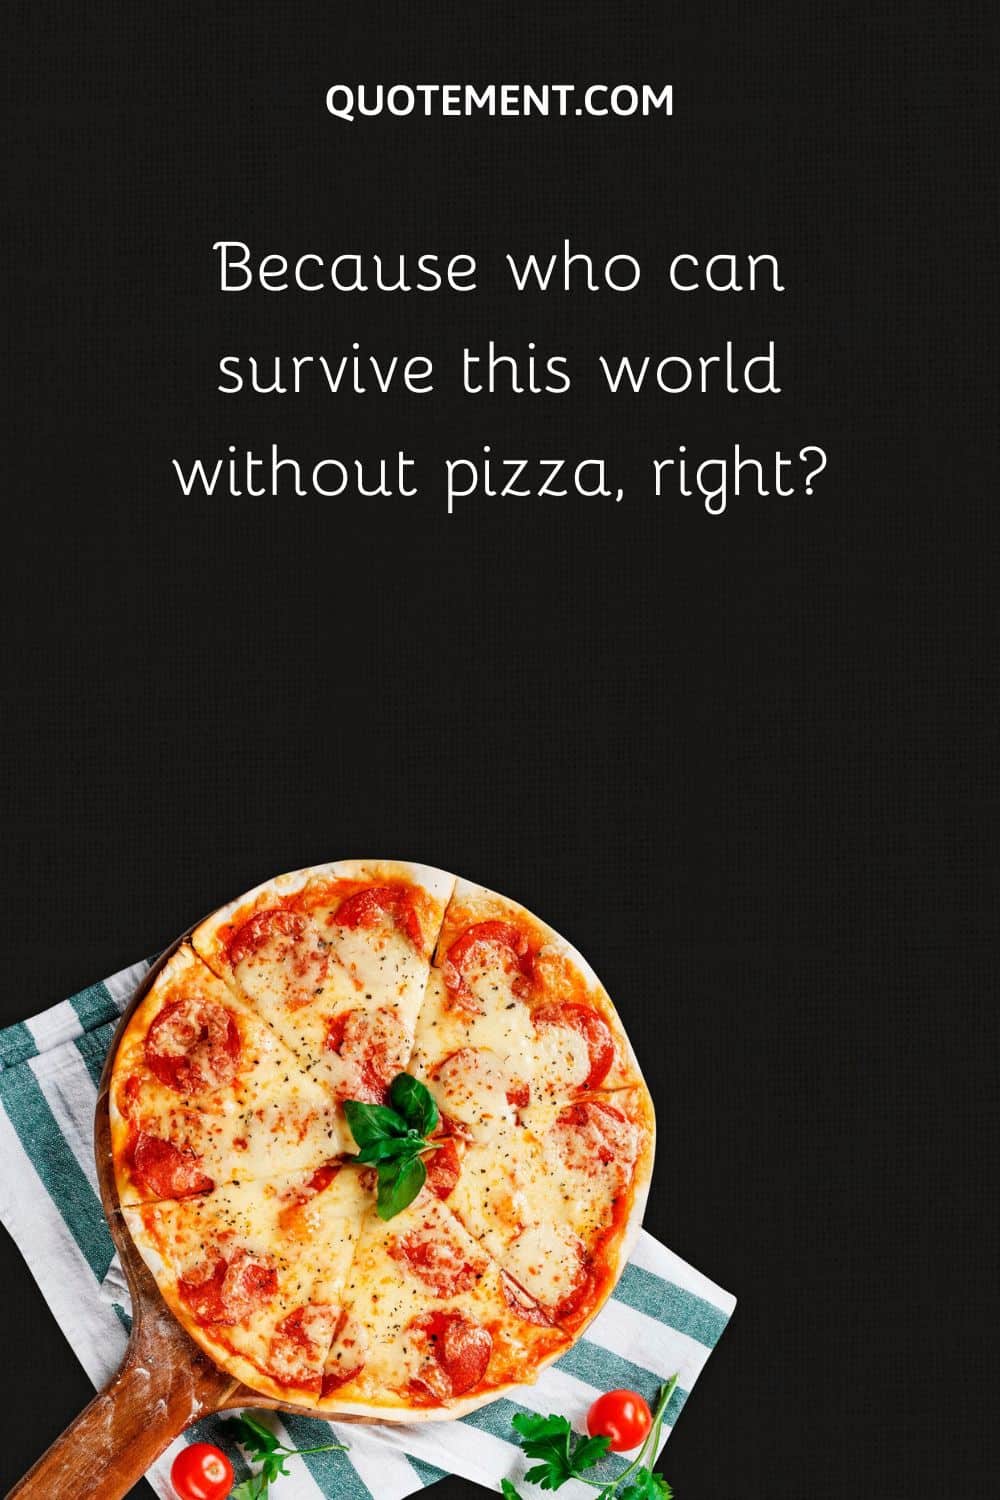 Because who can survive this world without pizza